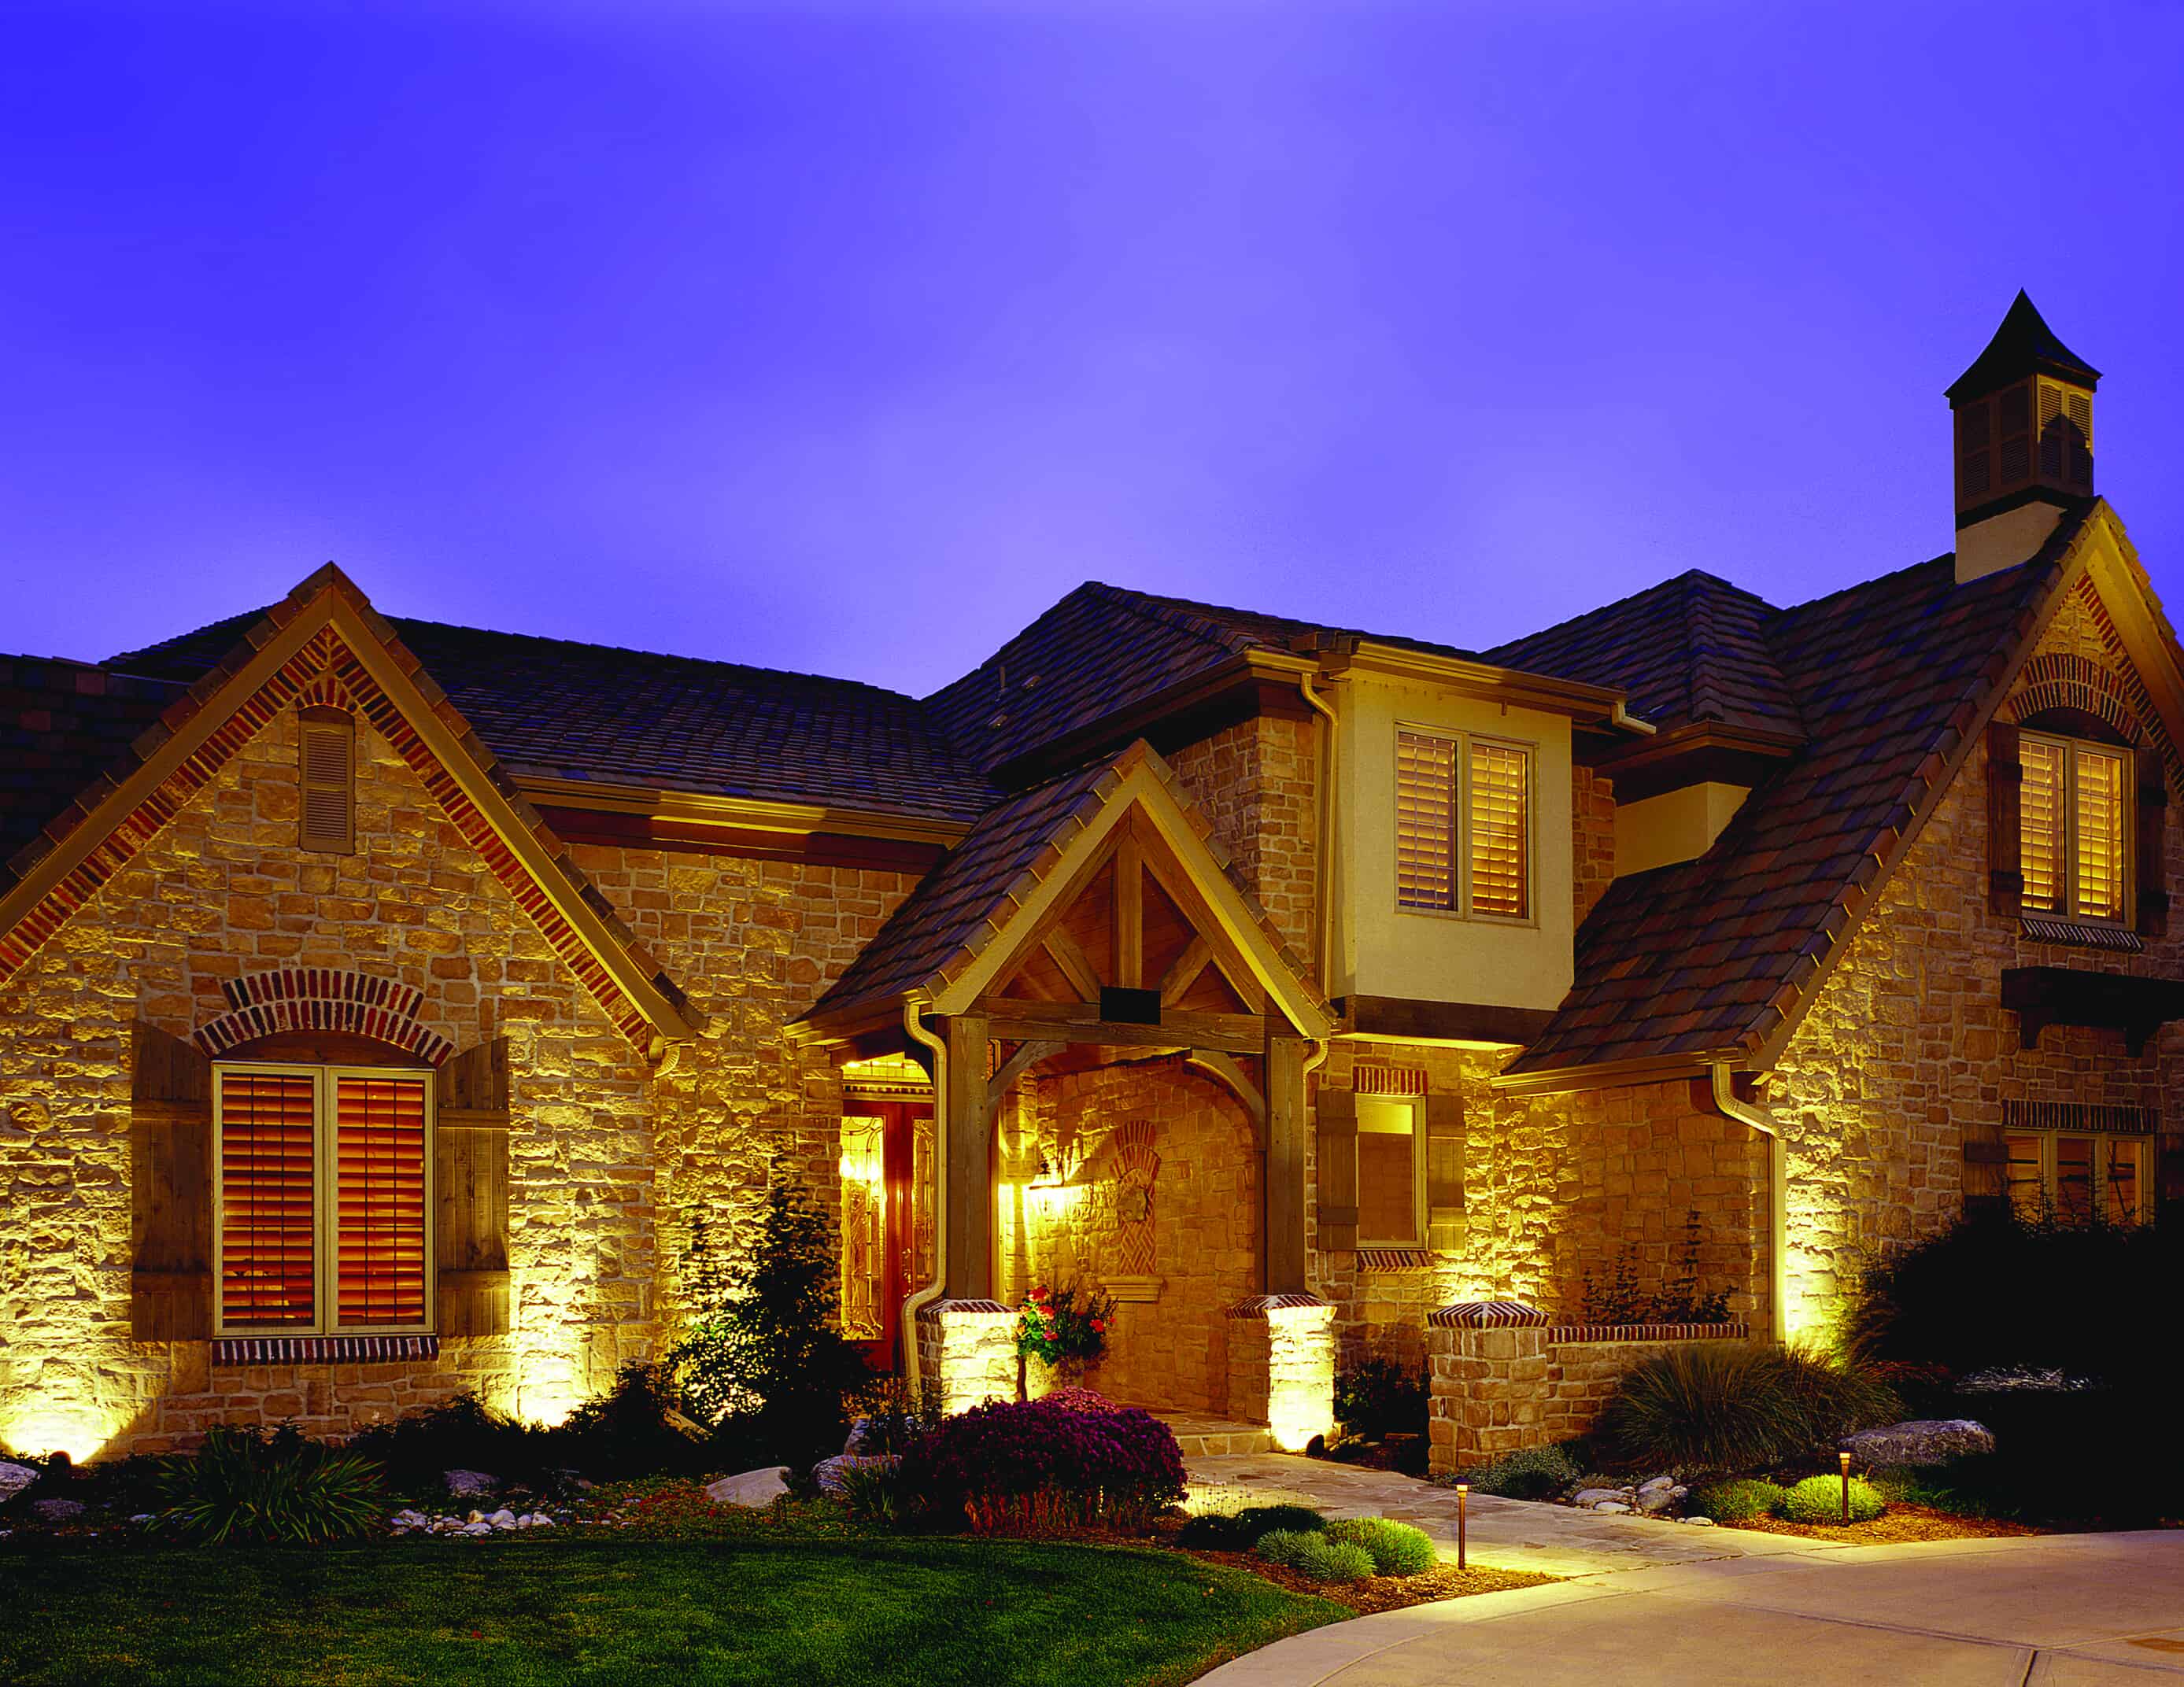 Home with outdoor lighting